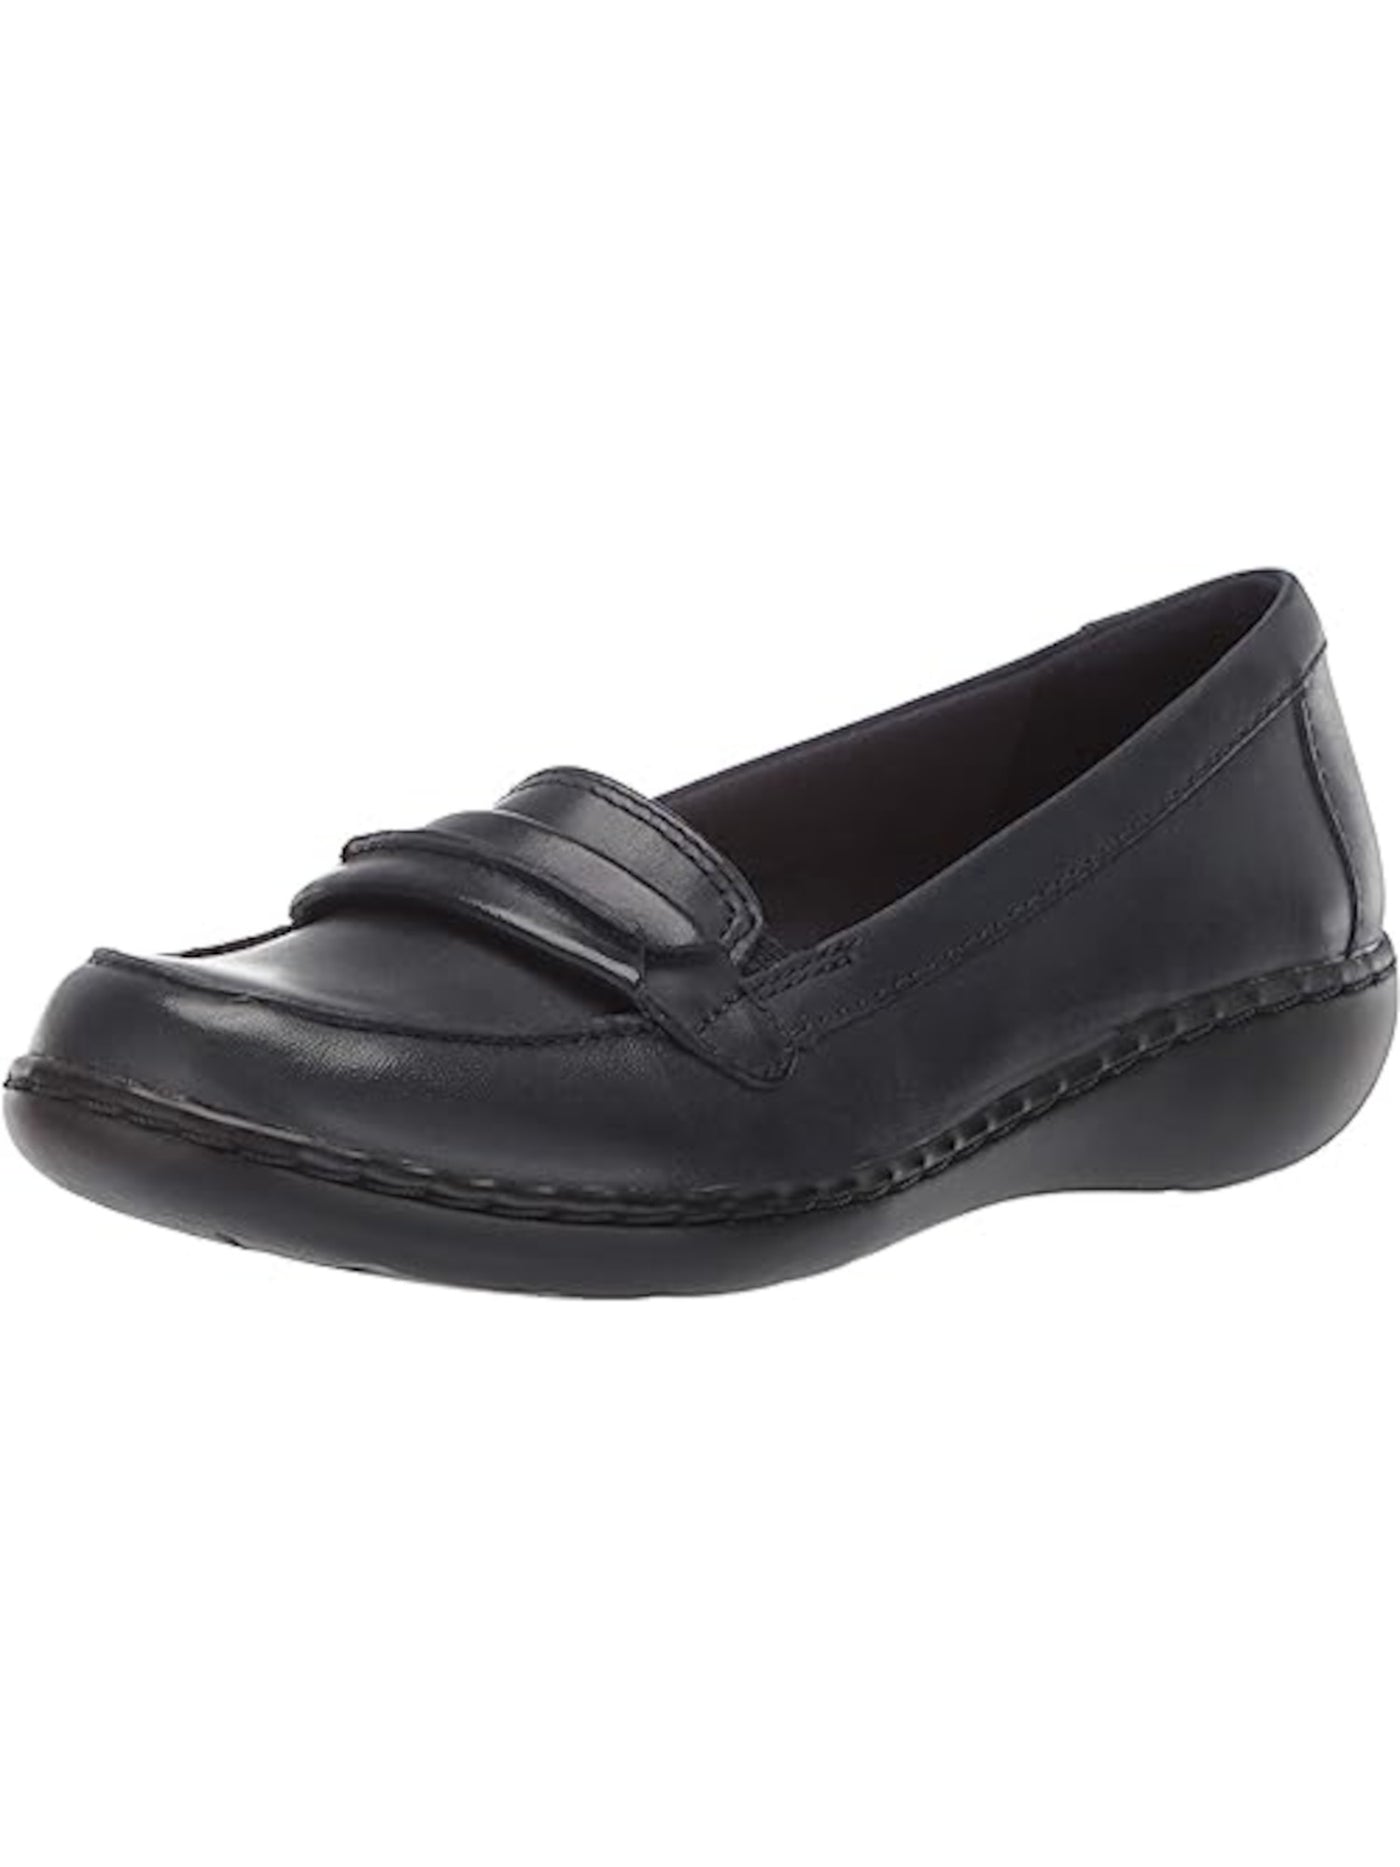 COLLECTION BY CLARKS Womens Black Goring Cushioned Comfort Ashland Lily Round Toe Wedge Slip On Leather Loafers 9 M